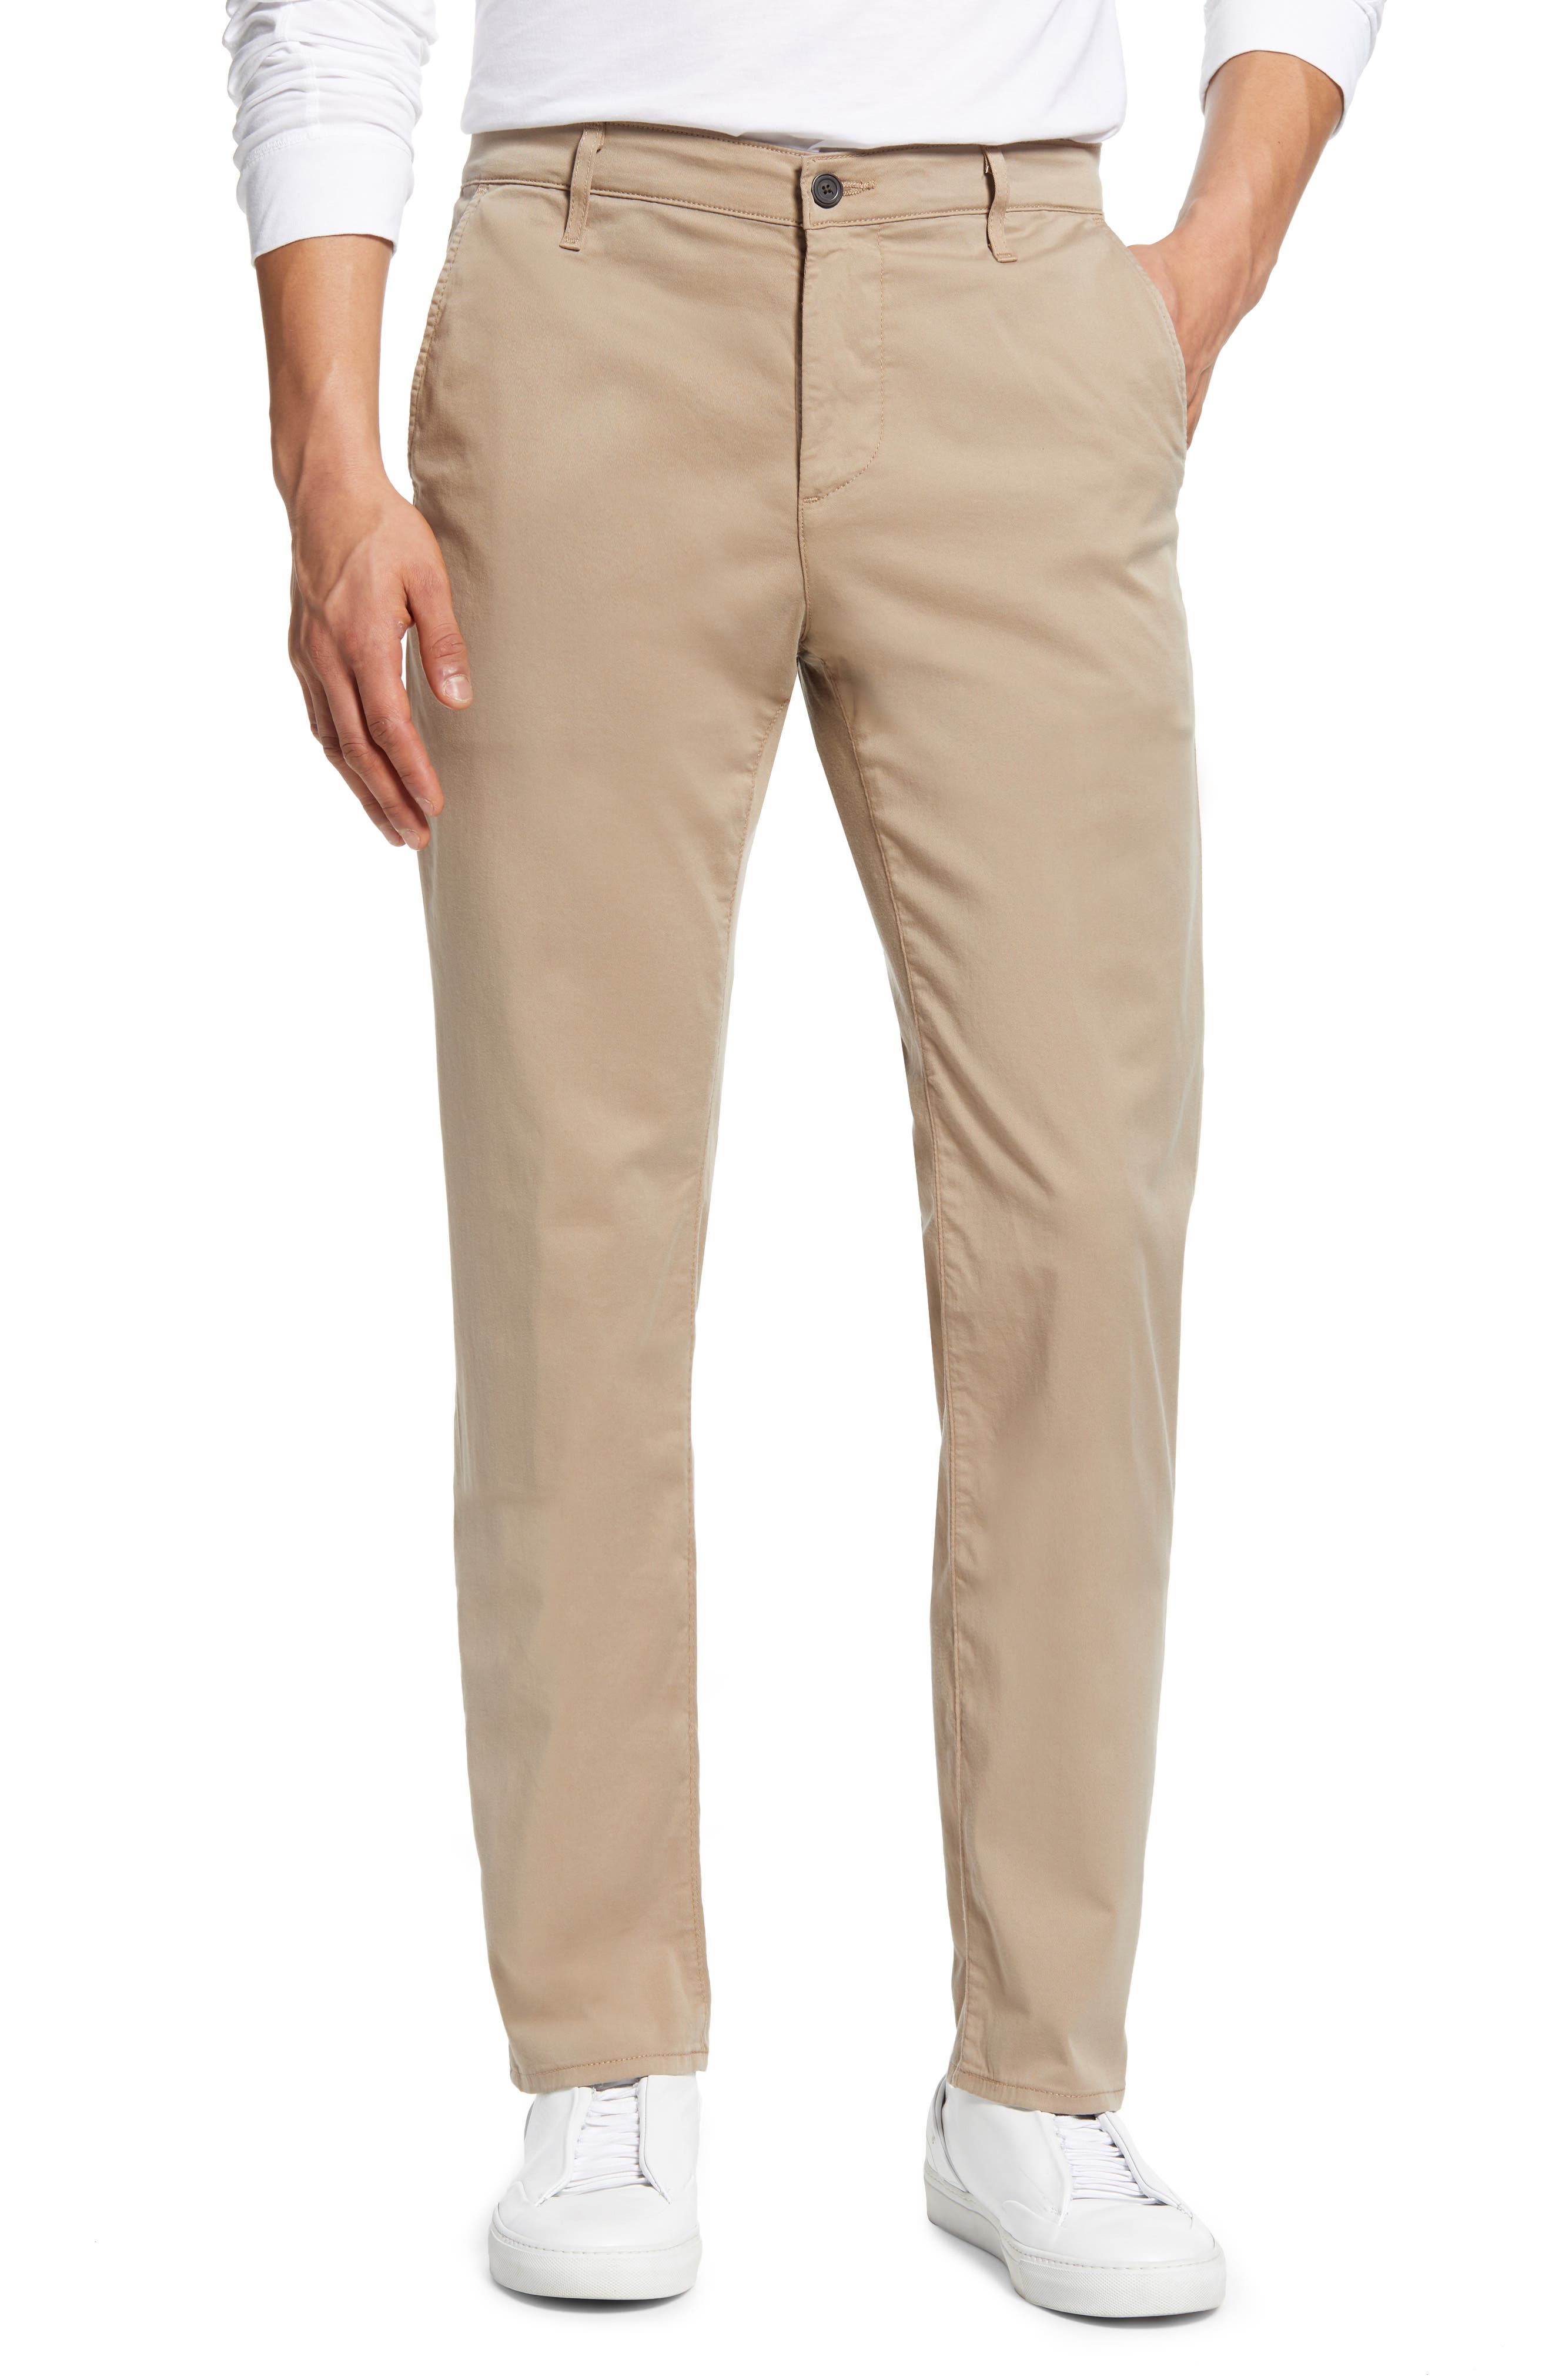 Ag Marshall Slim Fit Chinos In Parched Trail